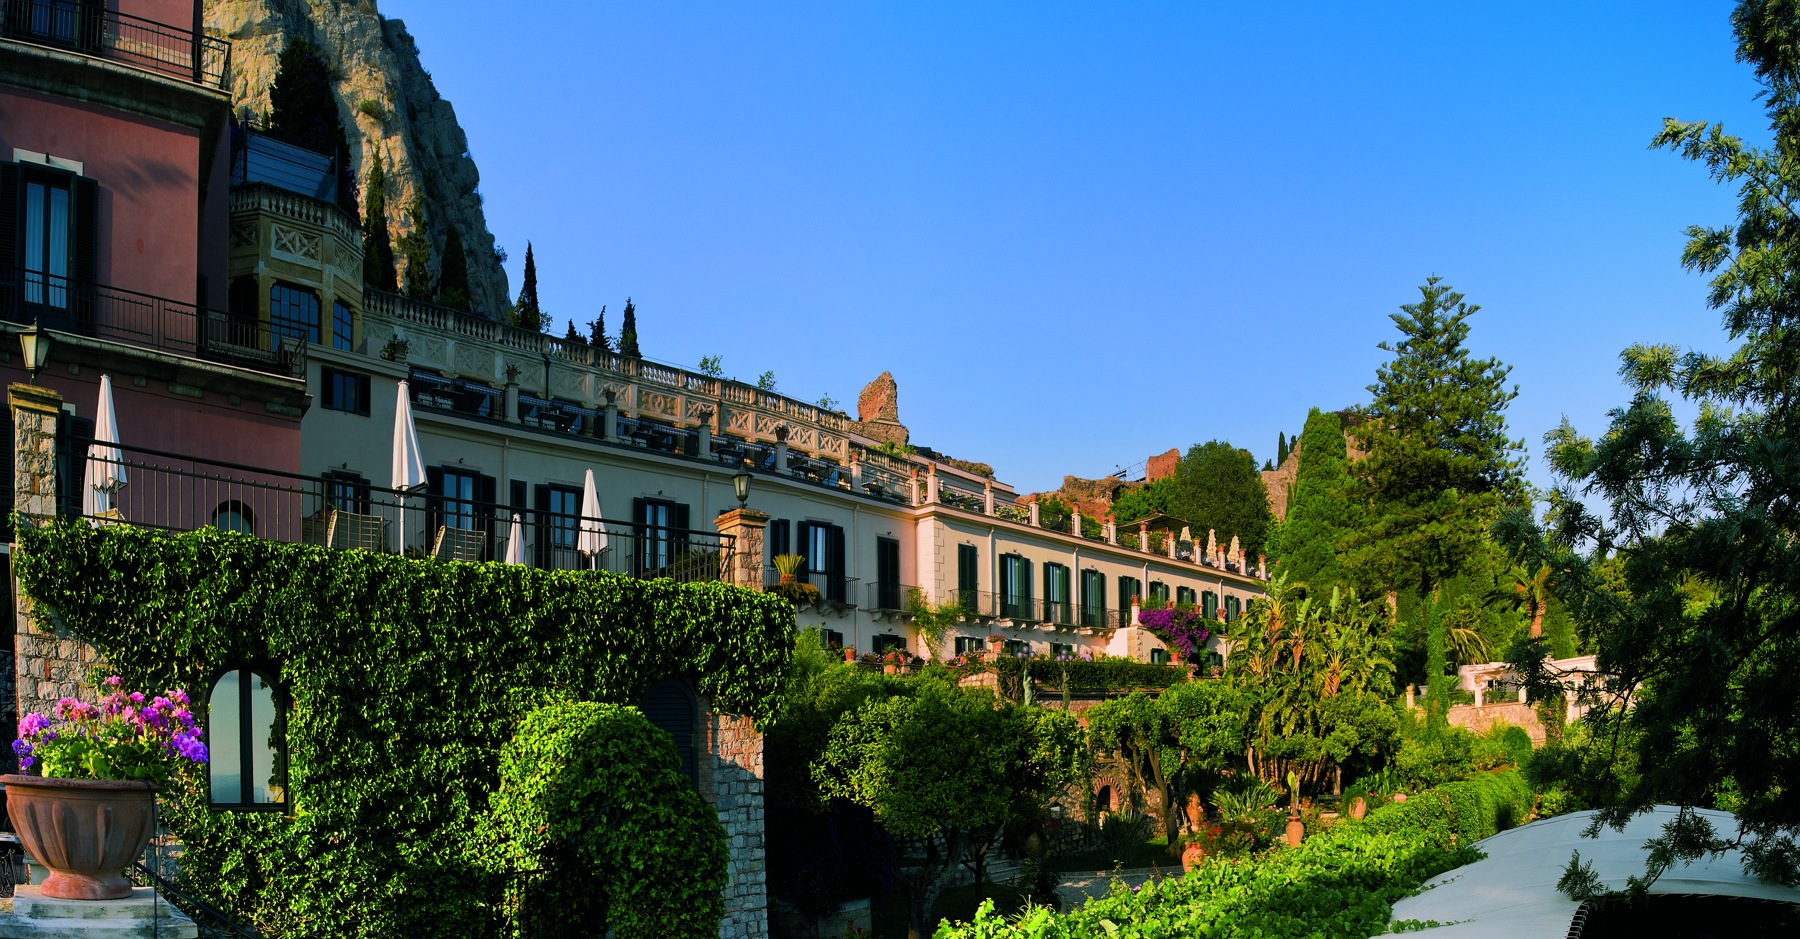 Grand Hotel Timeo, A Belmond Hotel - What do you miss about Sicily